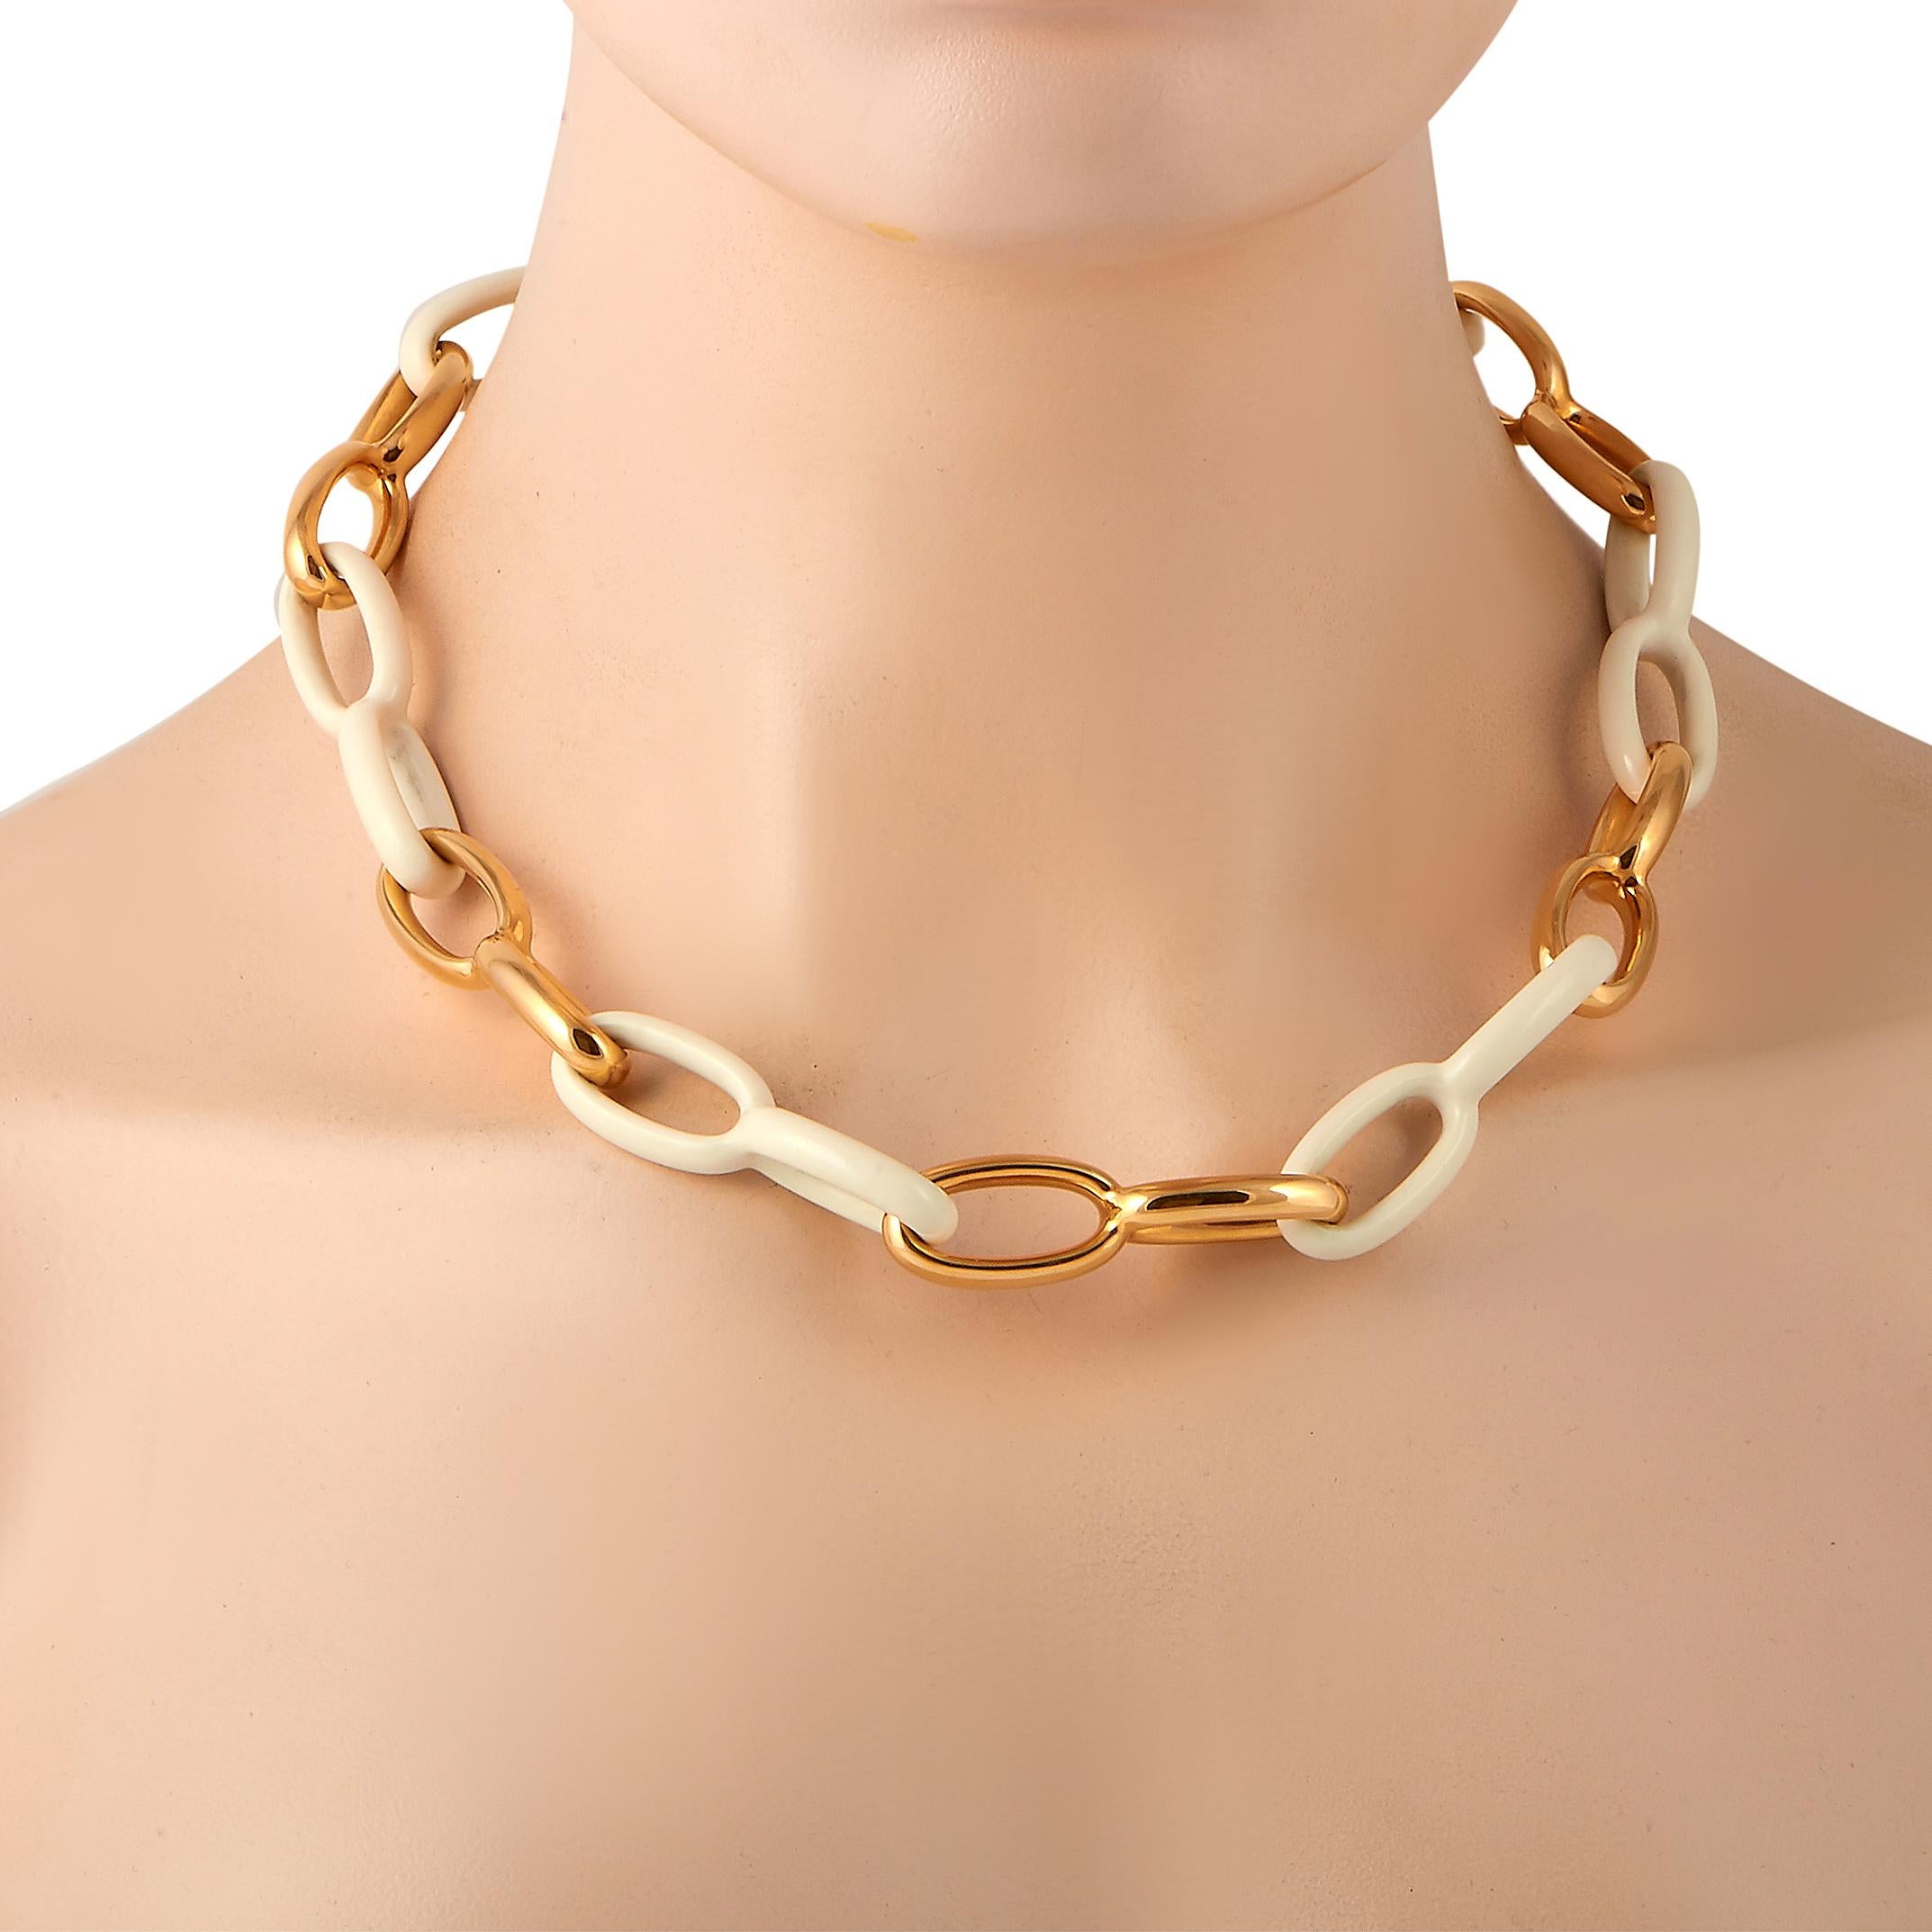 The Vhernier “Ottovolante” necklace is made out of 18K rose gold and kogolong and accentuated with a diamond stone. The necklace weighs 69.4 grams and measures 20” in length.

This jewelry piece is offered in brand new condition and includes the